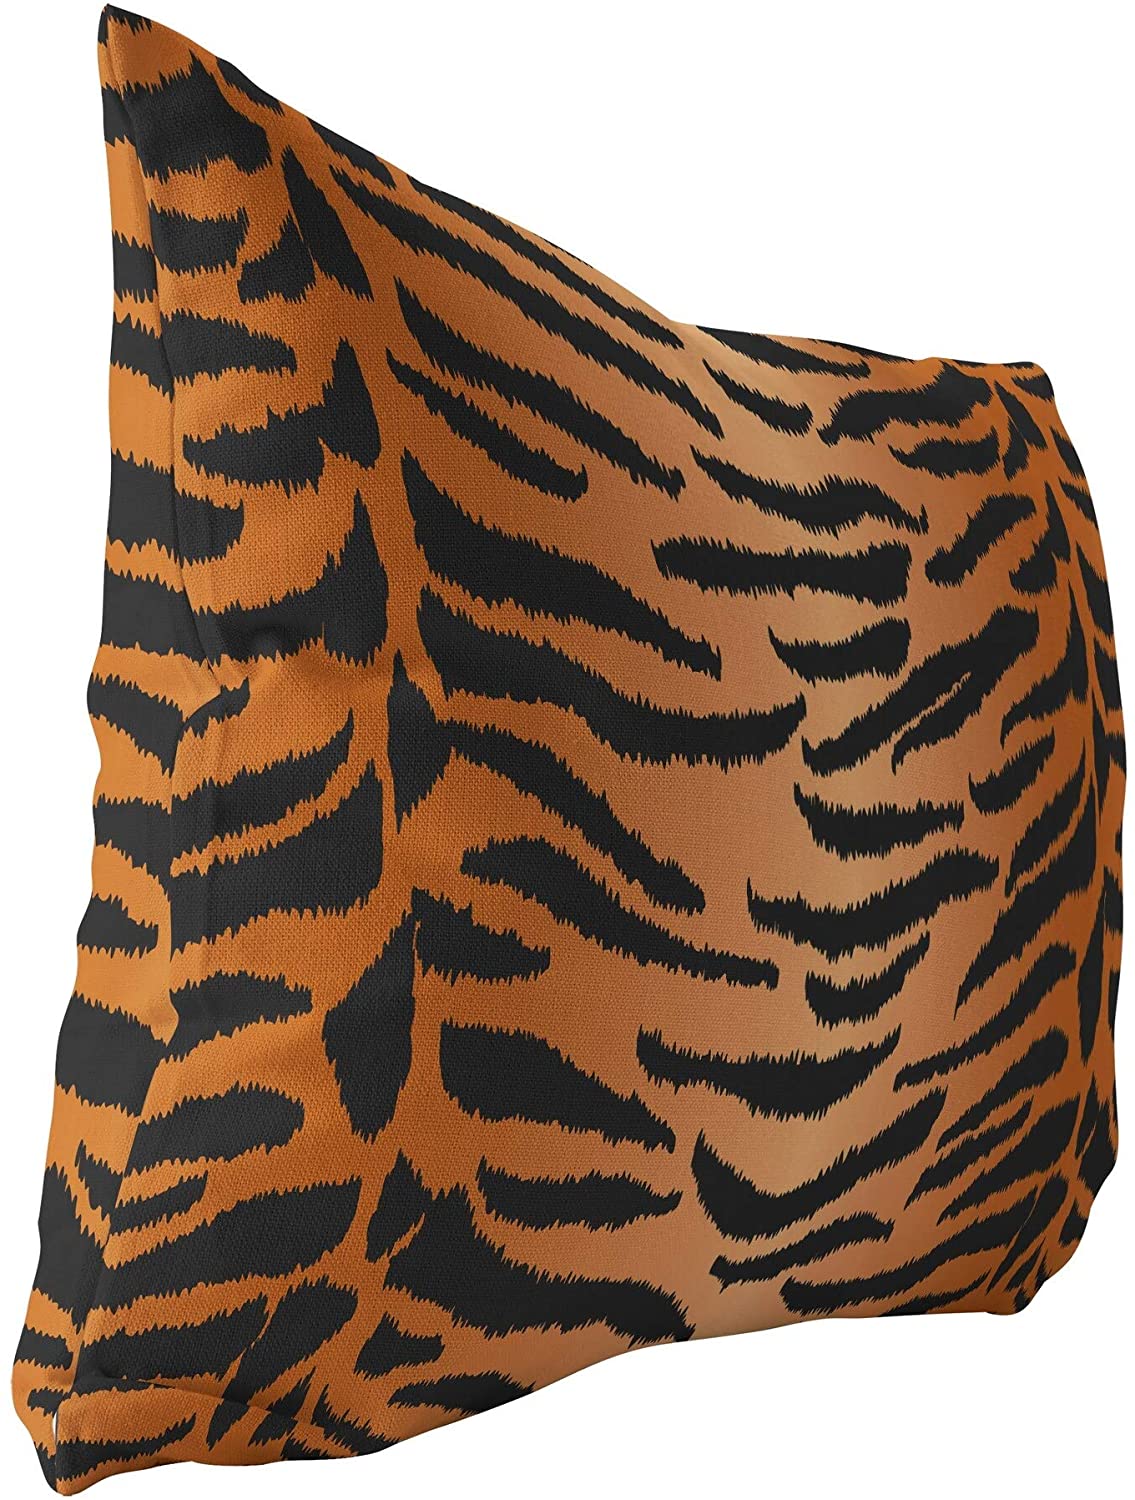 Tiger Natural Indoor|Outdoor Lumbar Pillow by Designs 20x14 Black Animal Modern Contemporary Polyester Removable Cover